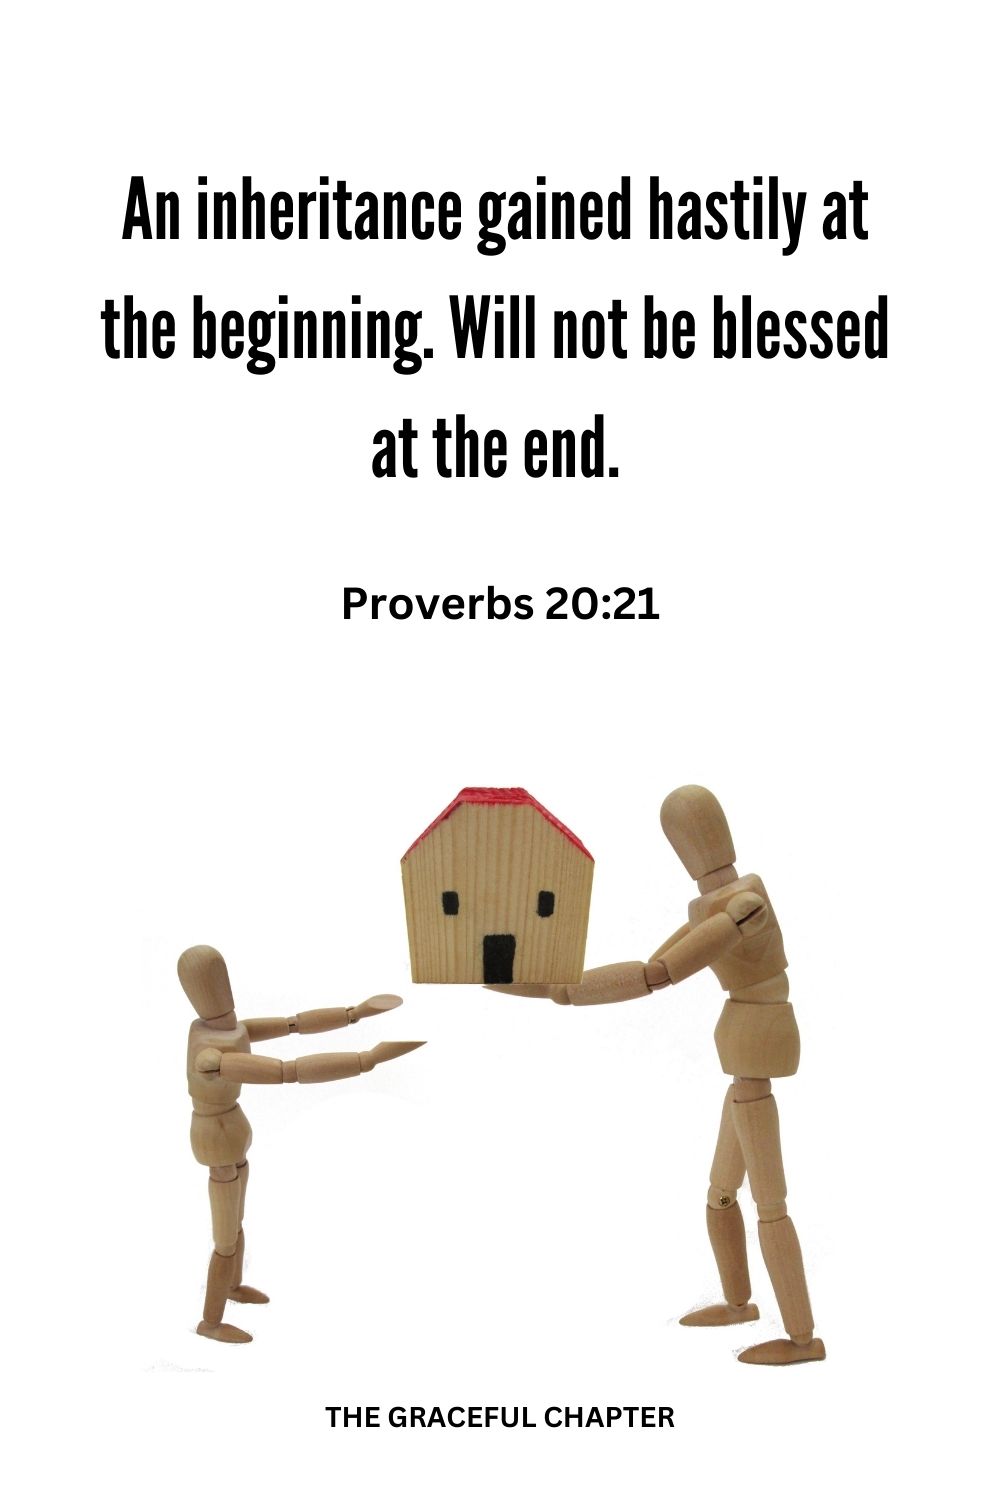 An inheritance gained hastily at the beginning. Will not be blessed at the end. Proverbs 20:21